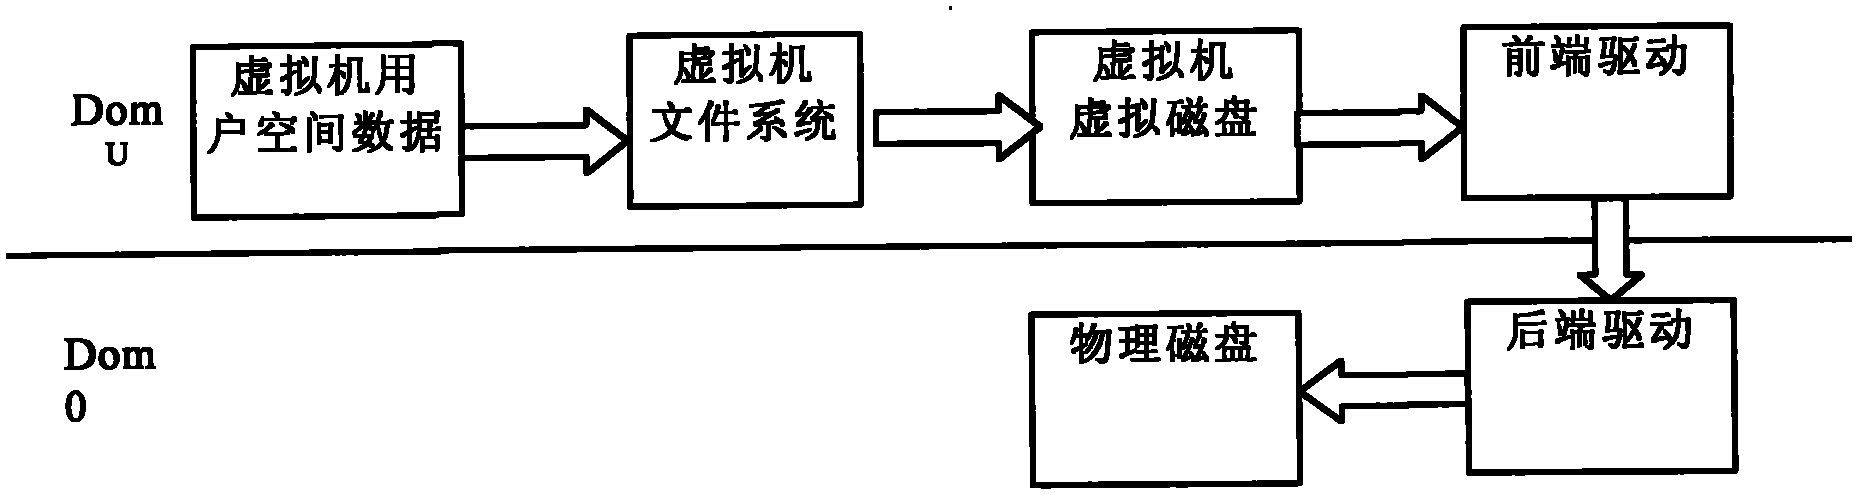 Data underlay encryption method based on disk drive in cloud computing environment